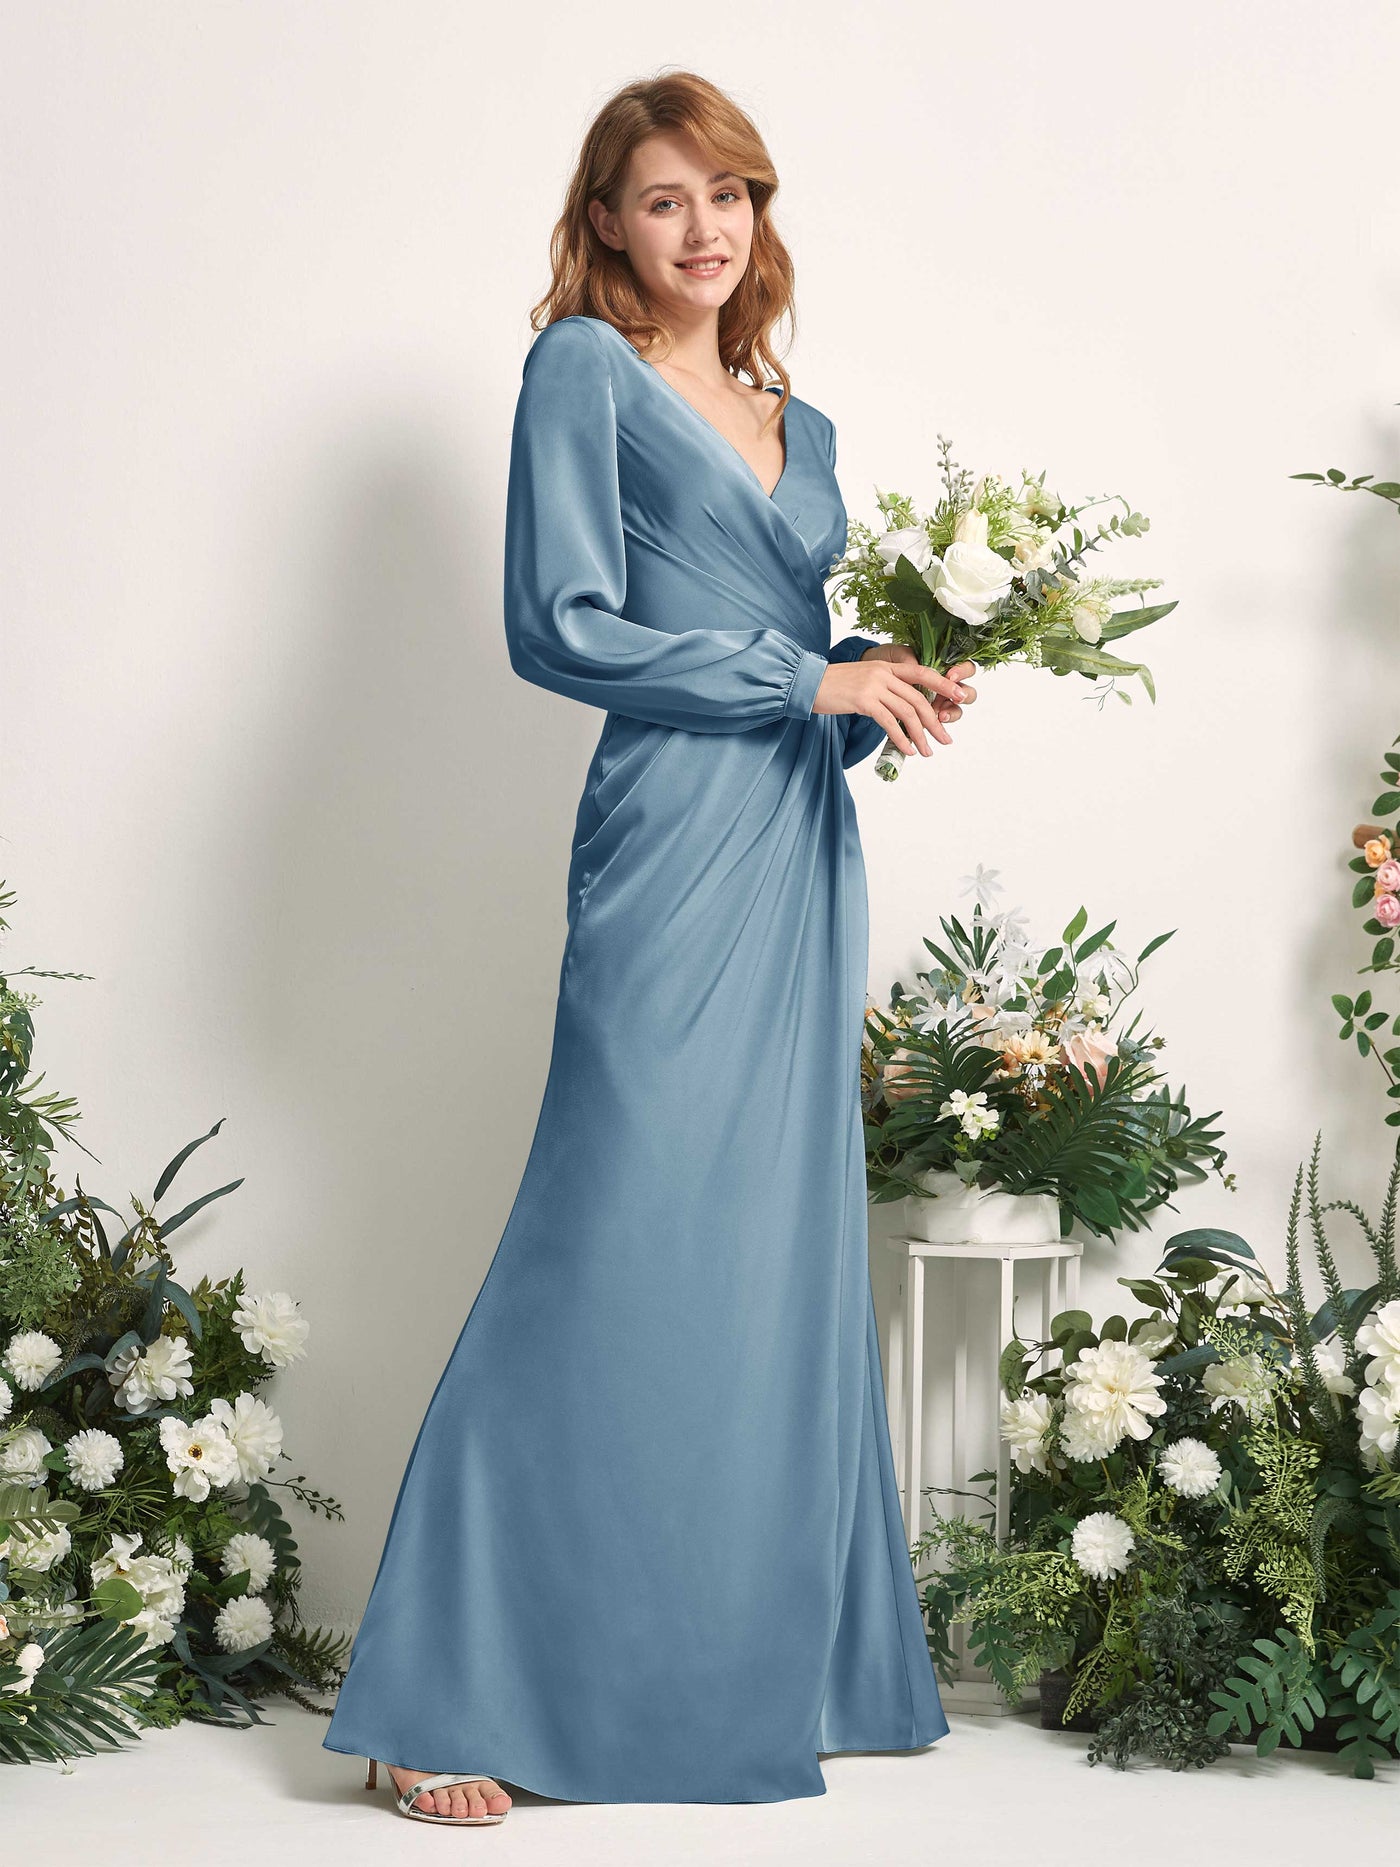 Ink blue Bridesmaid Dresses Bridesmaid Dress Ball Gown Satin V-neck Full Length Long Sleeves Wedding Party Dress (80225114)#color_ink-blue